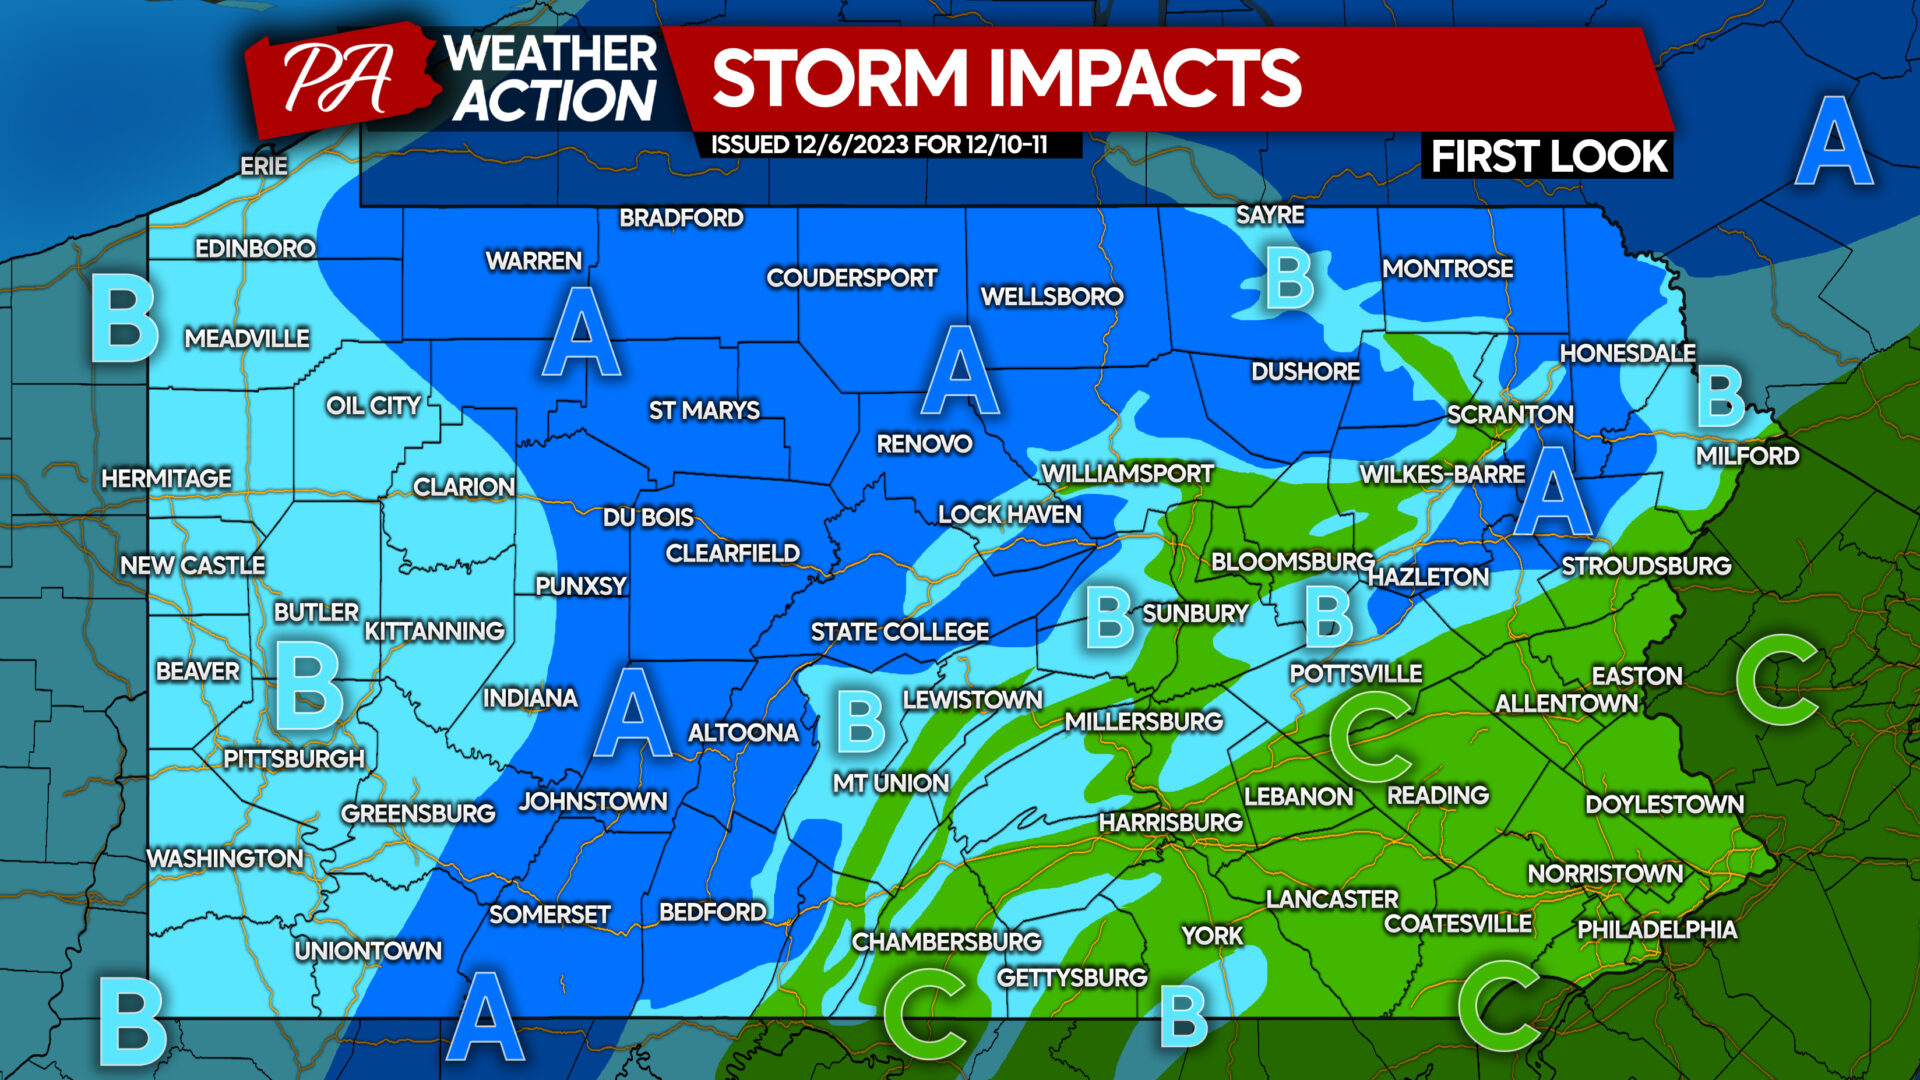 Rain to Snow Changeover Possible Sunday Night into Monday Morning in Areas of Pennsylvania; First Look at Snow Accumulation Potential